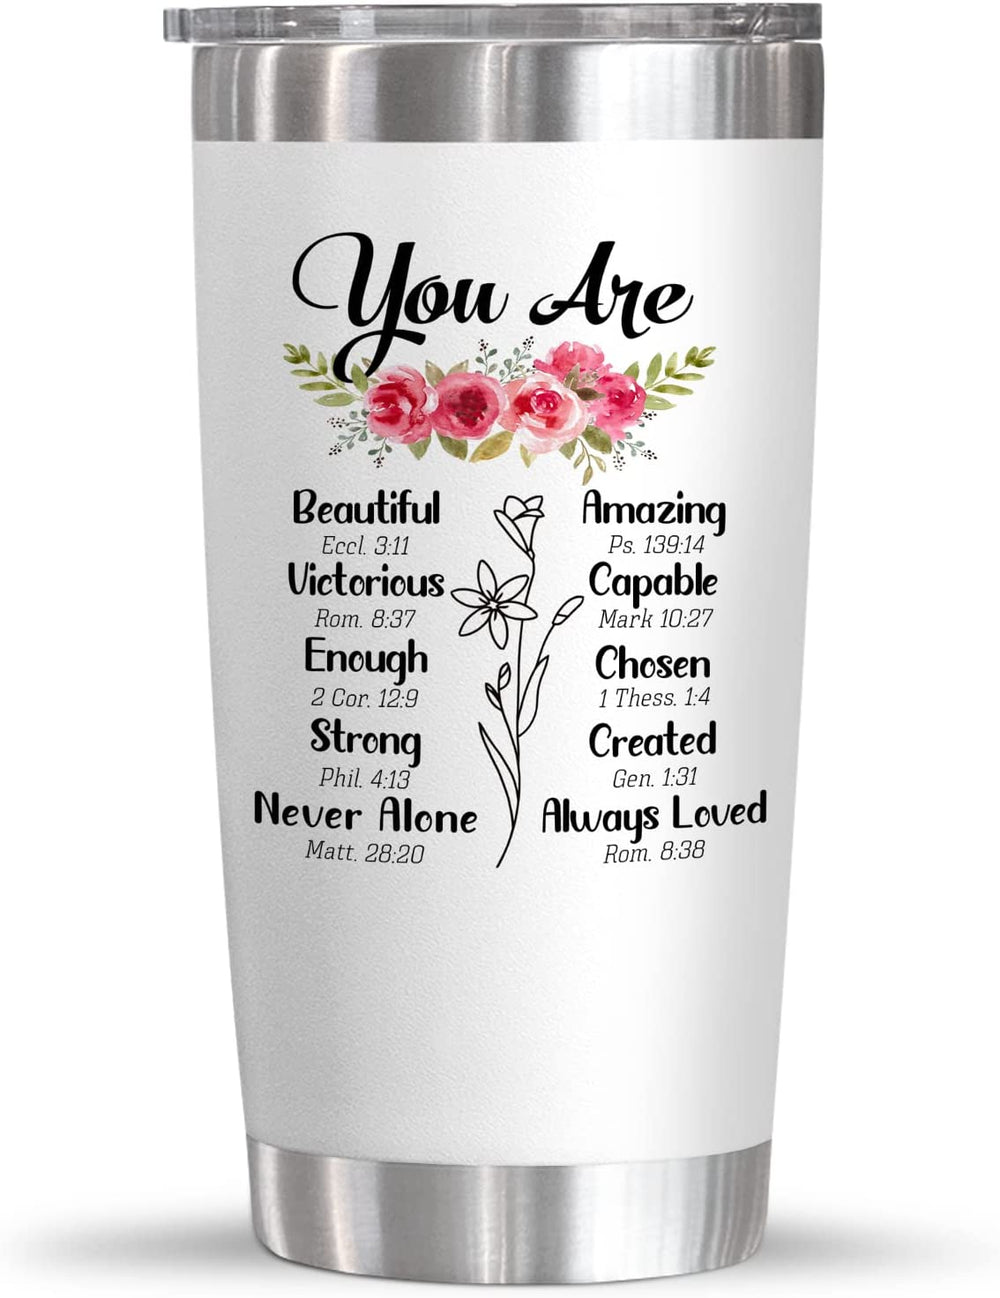 Religious-Inspired Gifts for Women: 20 Oz Stainless Steel Tumbler for Mother’s Day, Birthdays, and More – JETU002